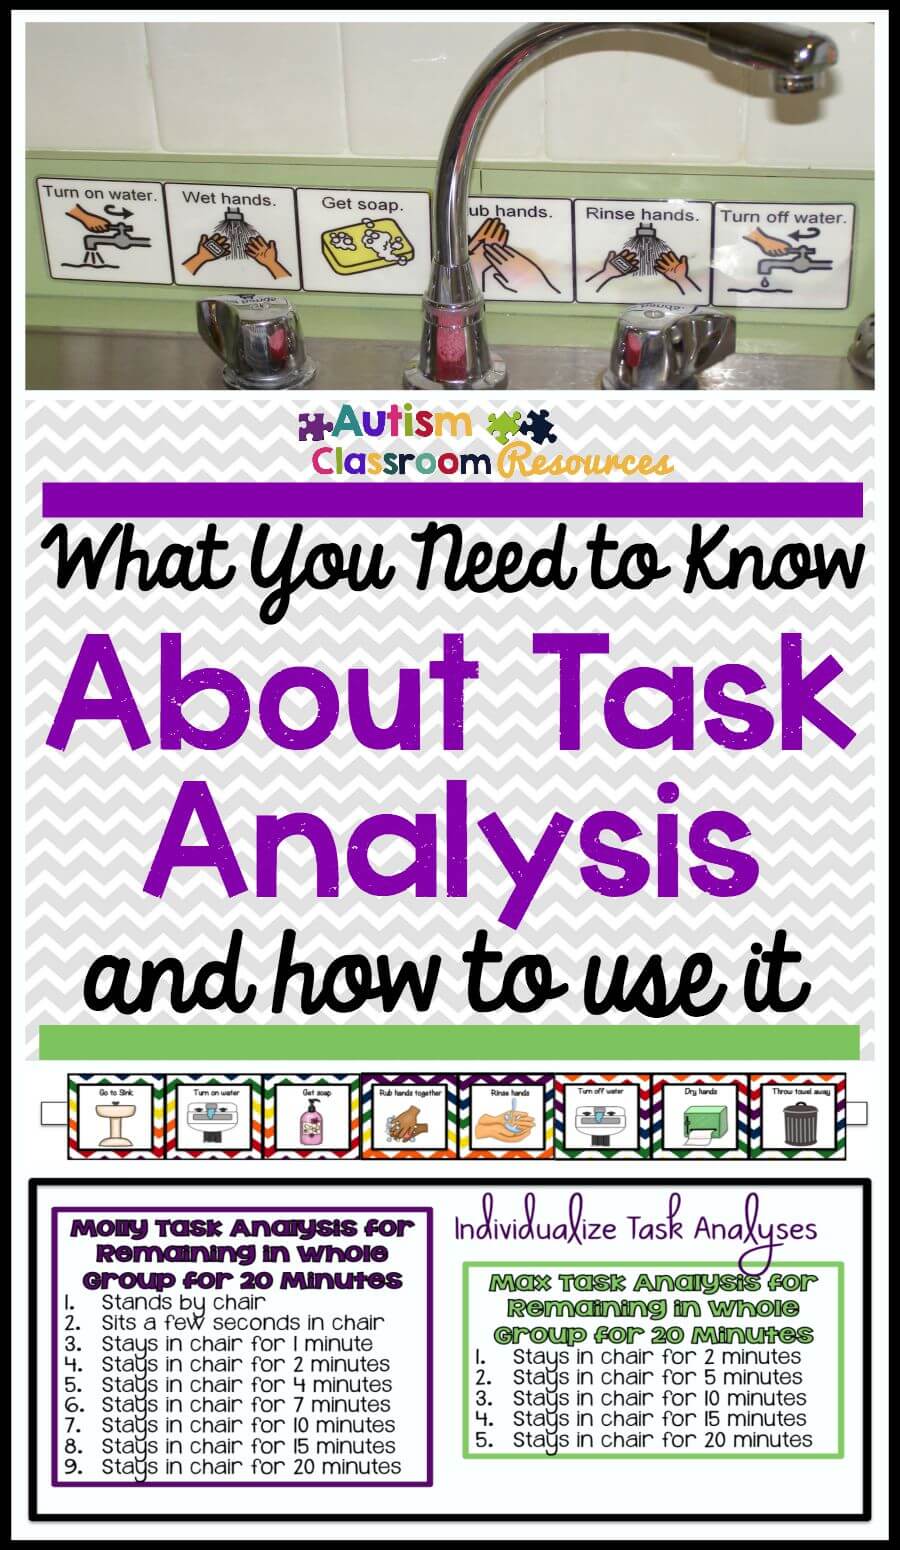 task analysis meaning in education